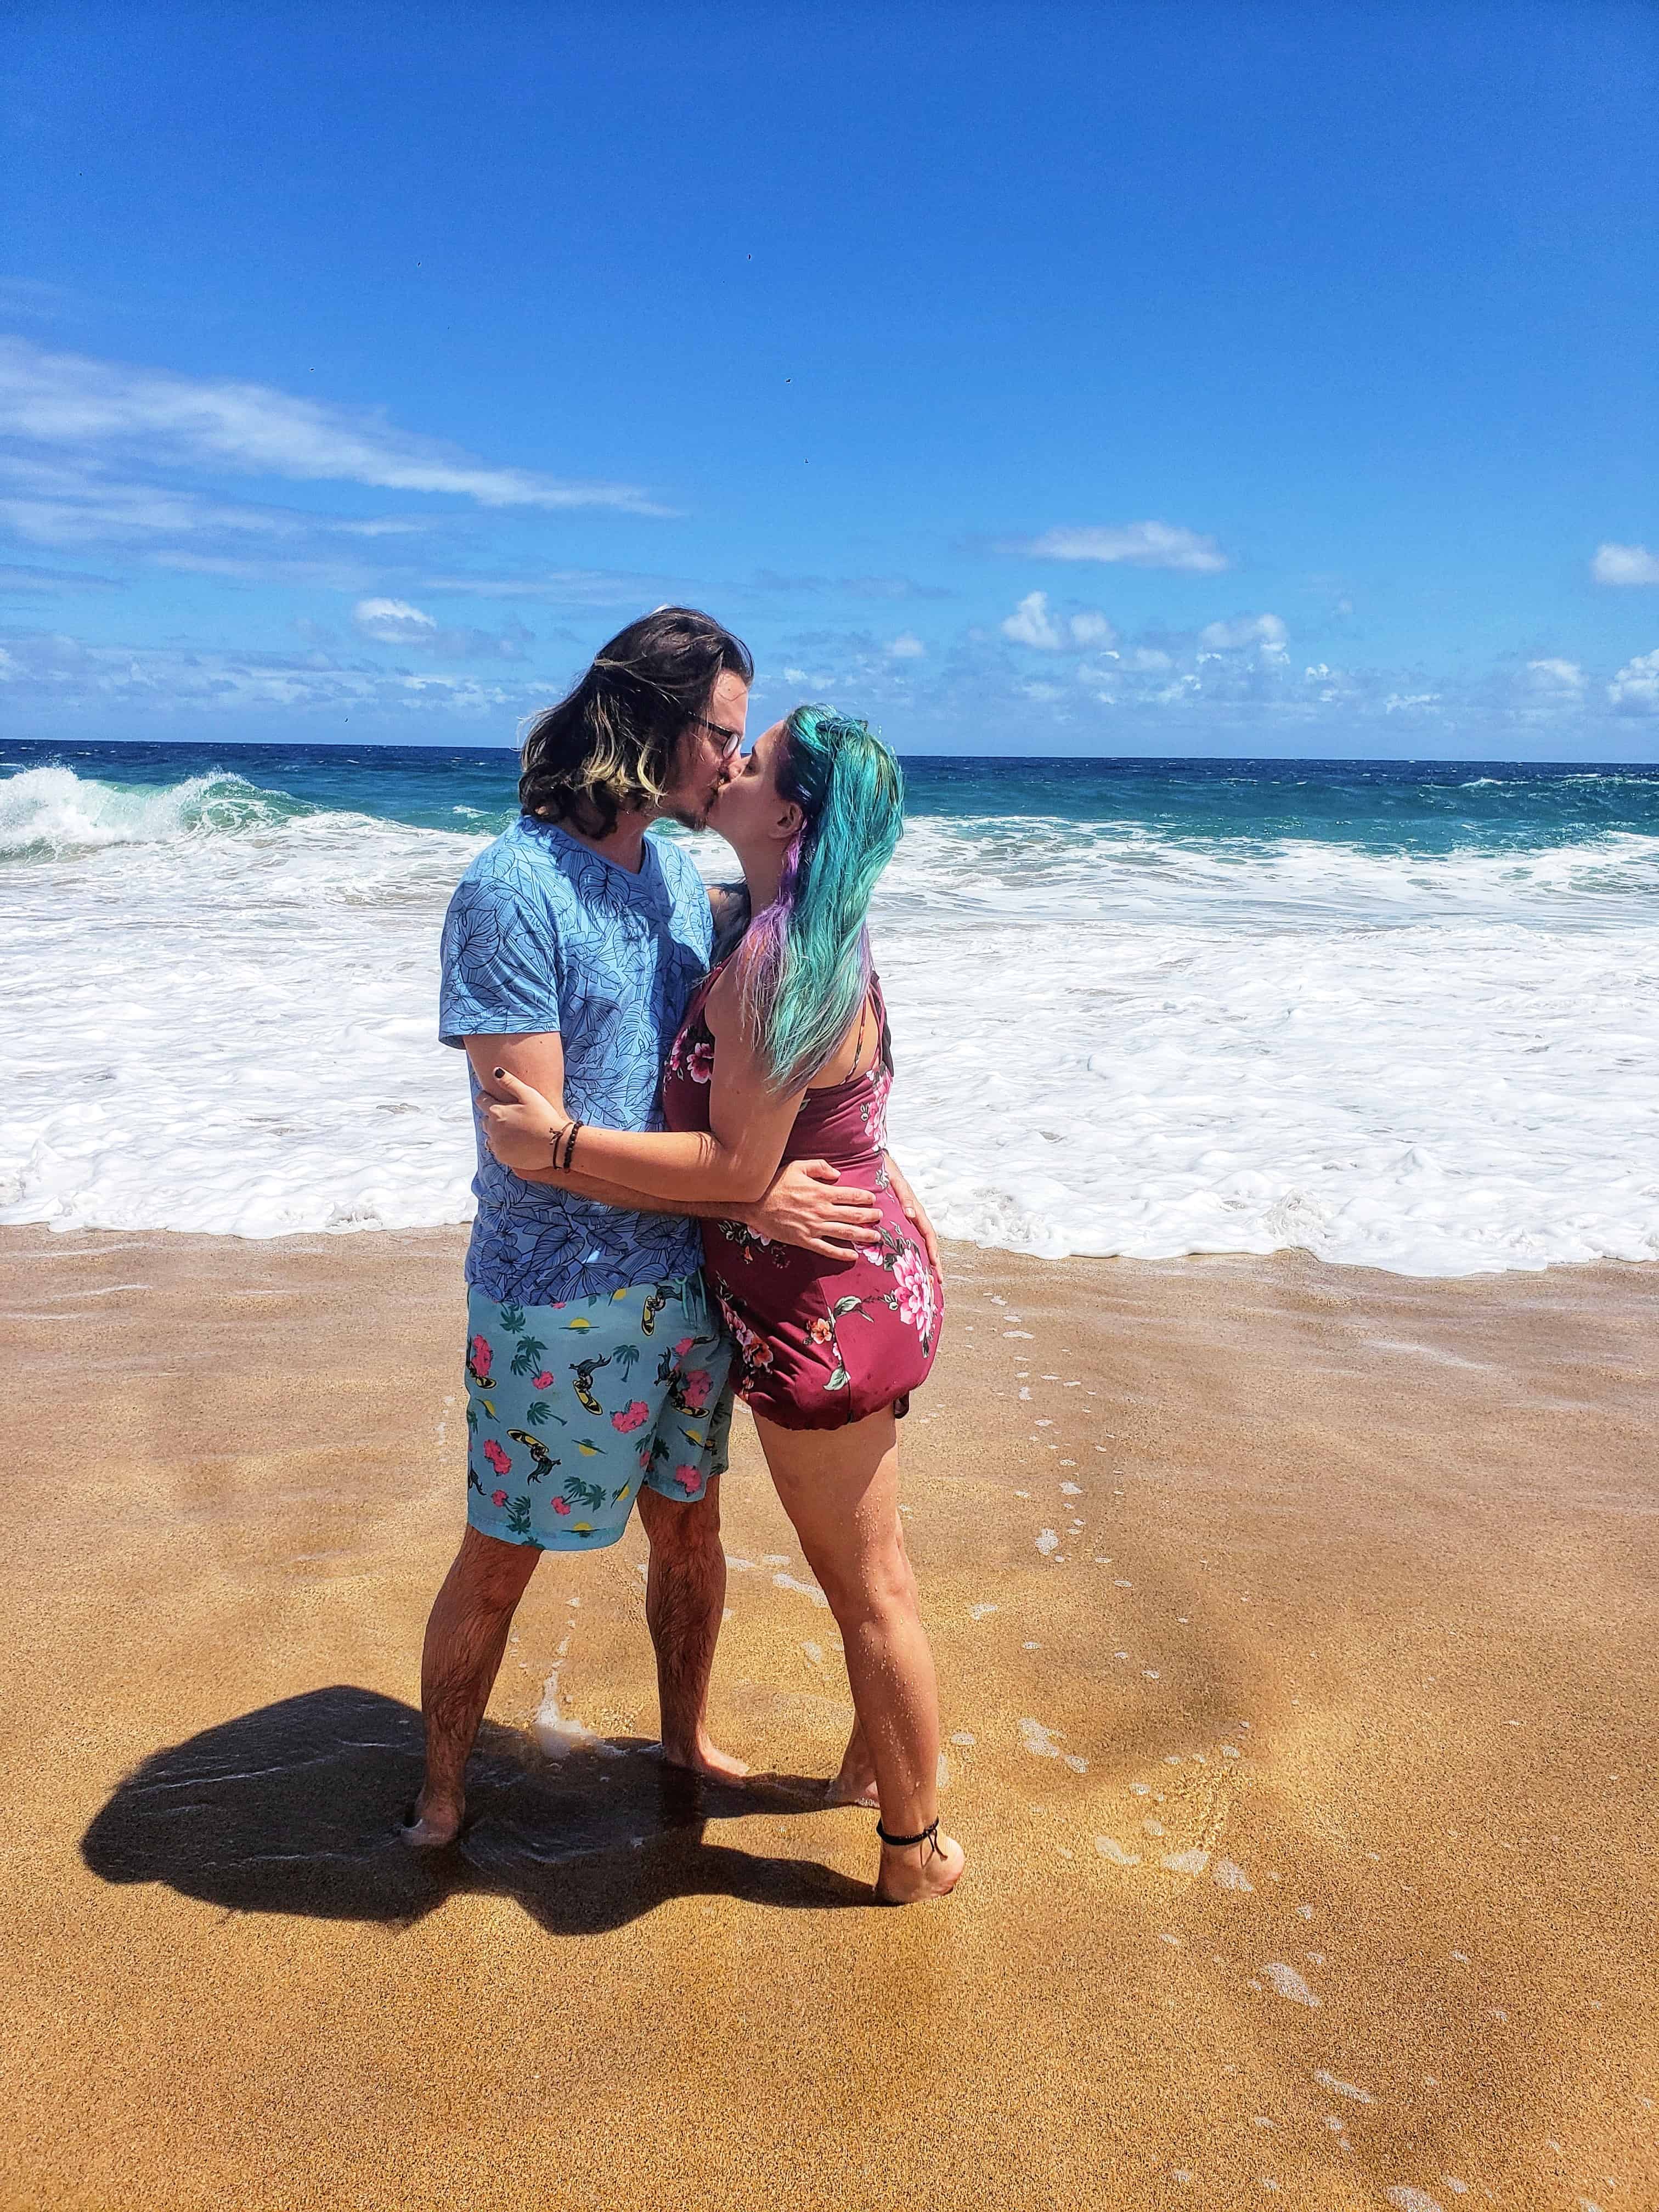 A man in blue swim trunks and a blue t-shirt and woman in a burgundy dress kiss on a white sandy beach.